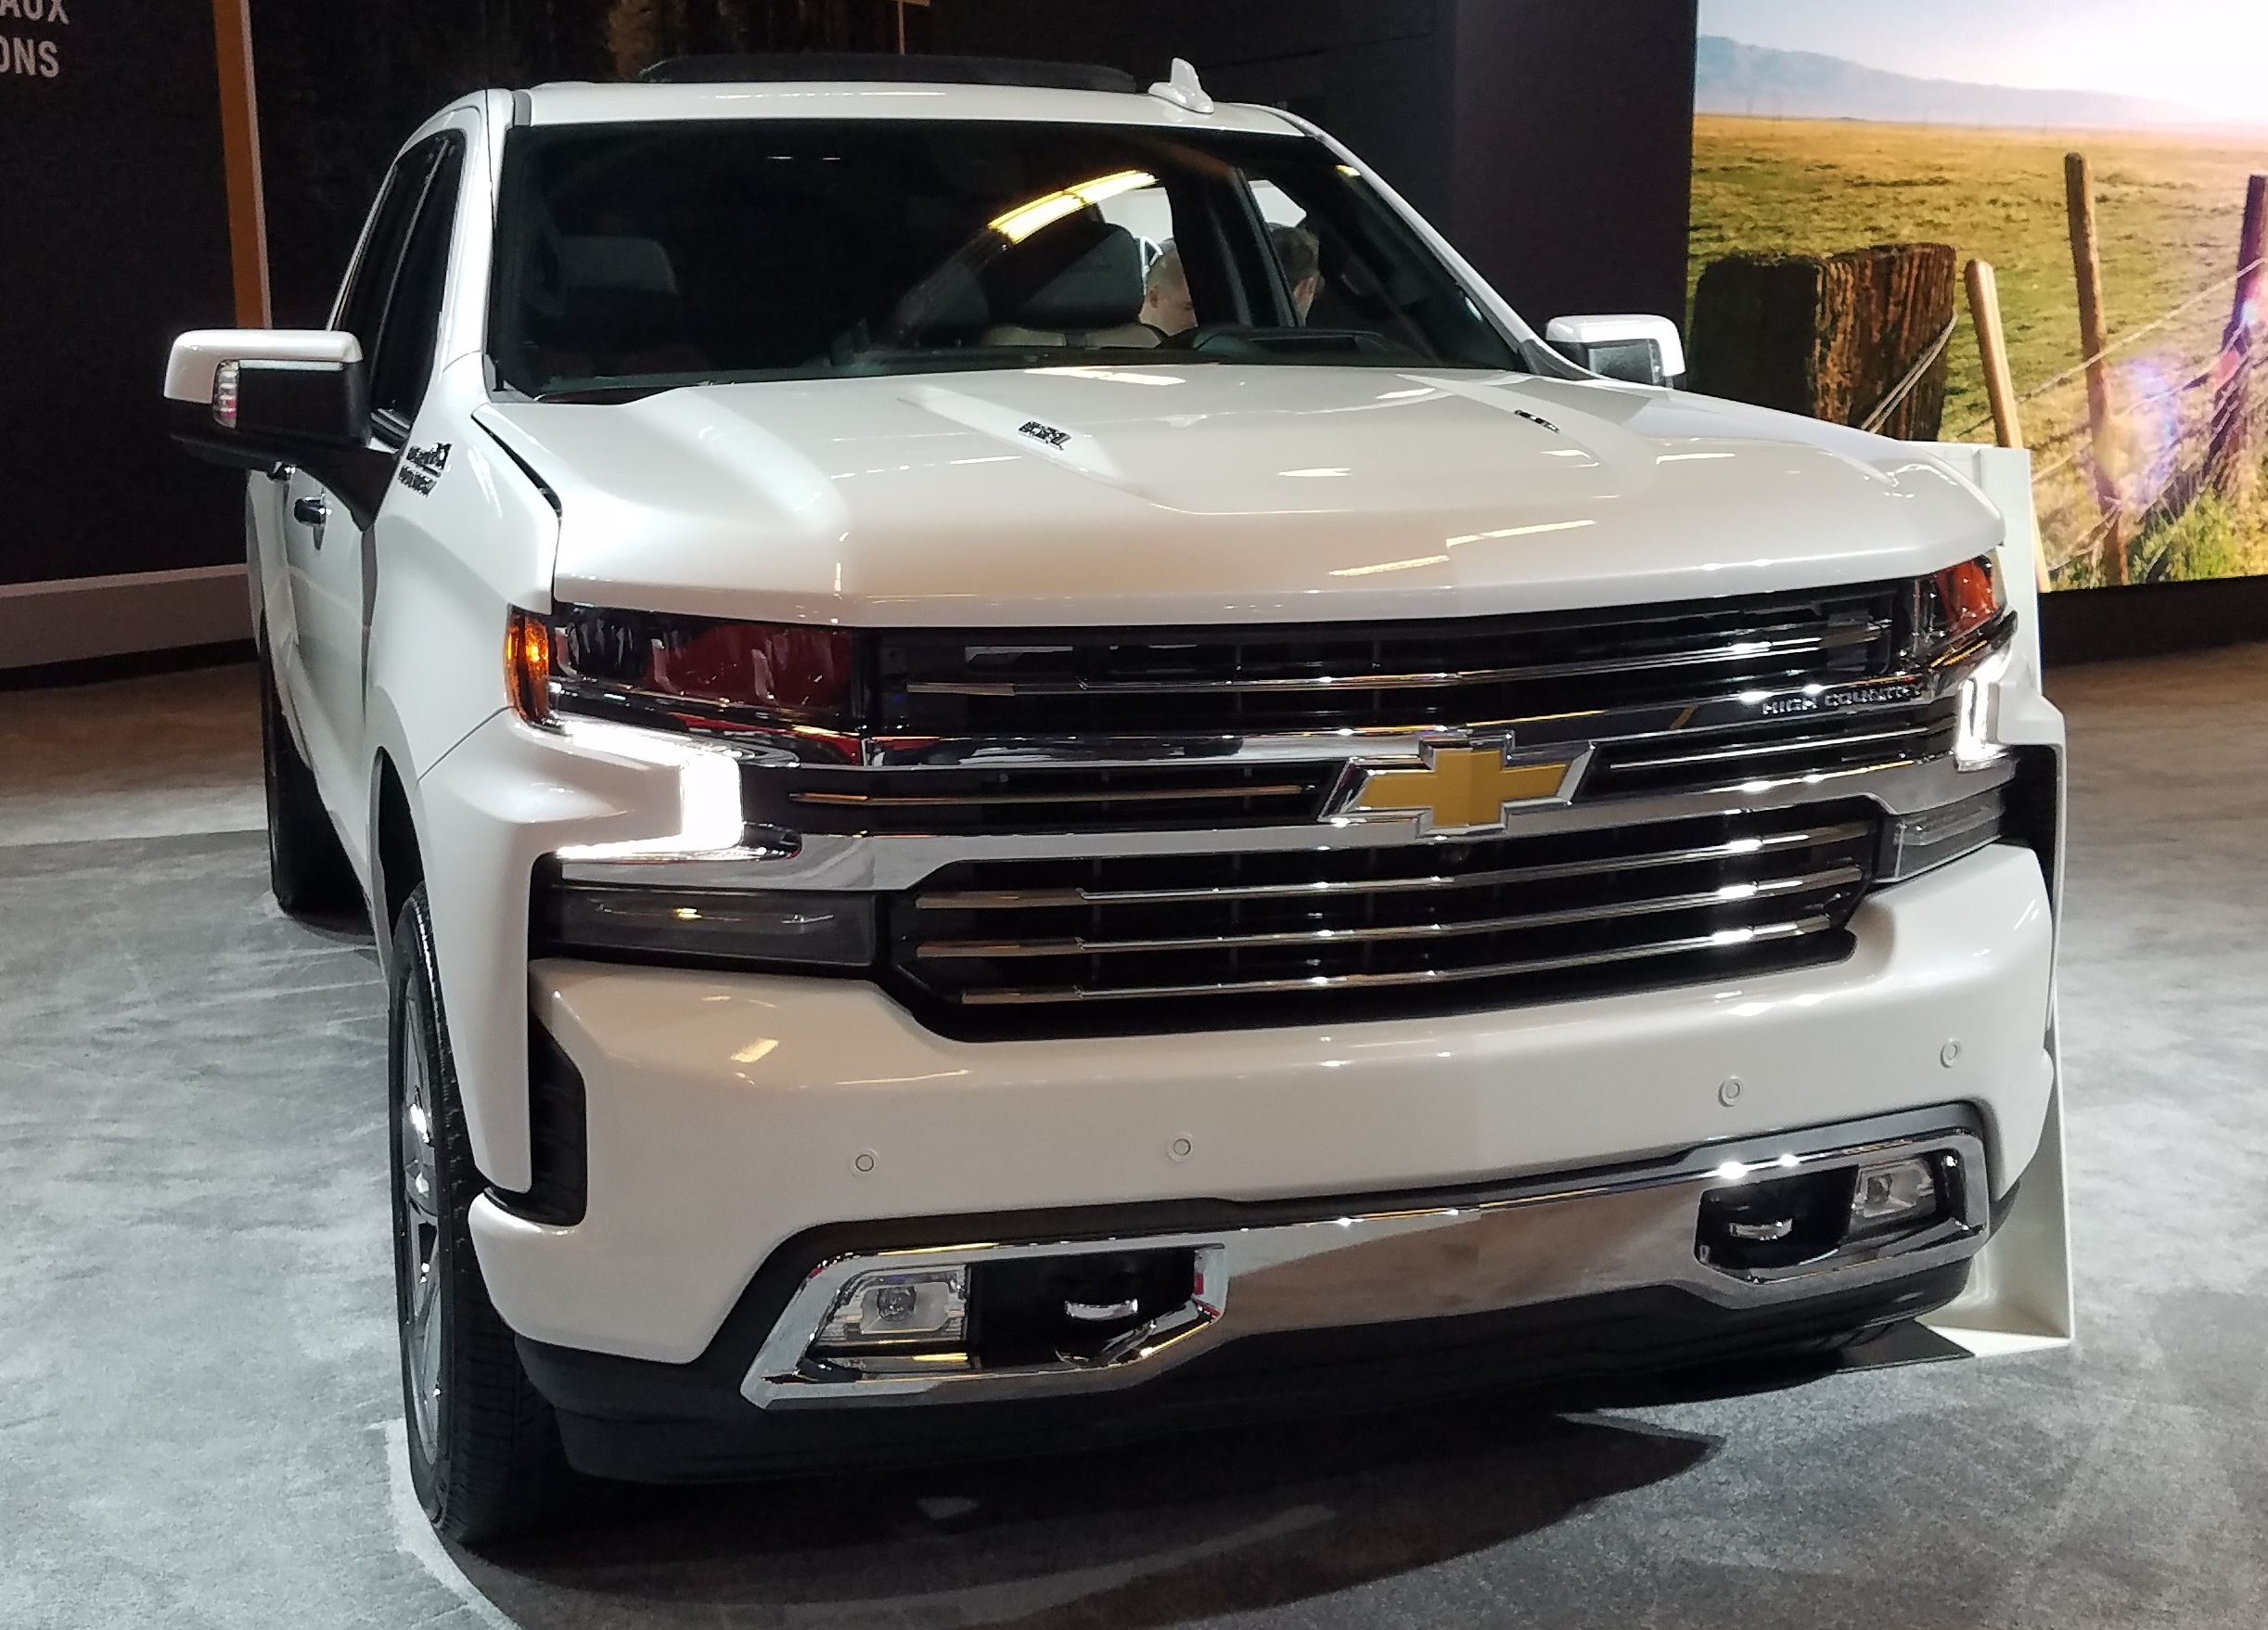 2020 Chevrolet Silverado 1500 Specifications, Pricing, Pictures and Videos